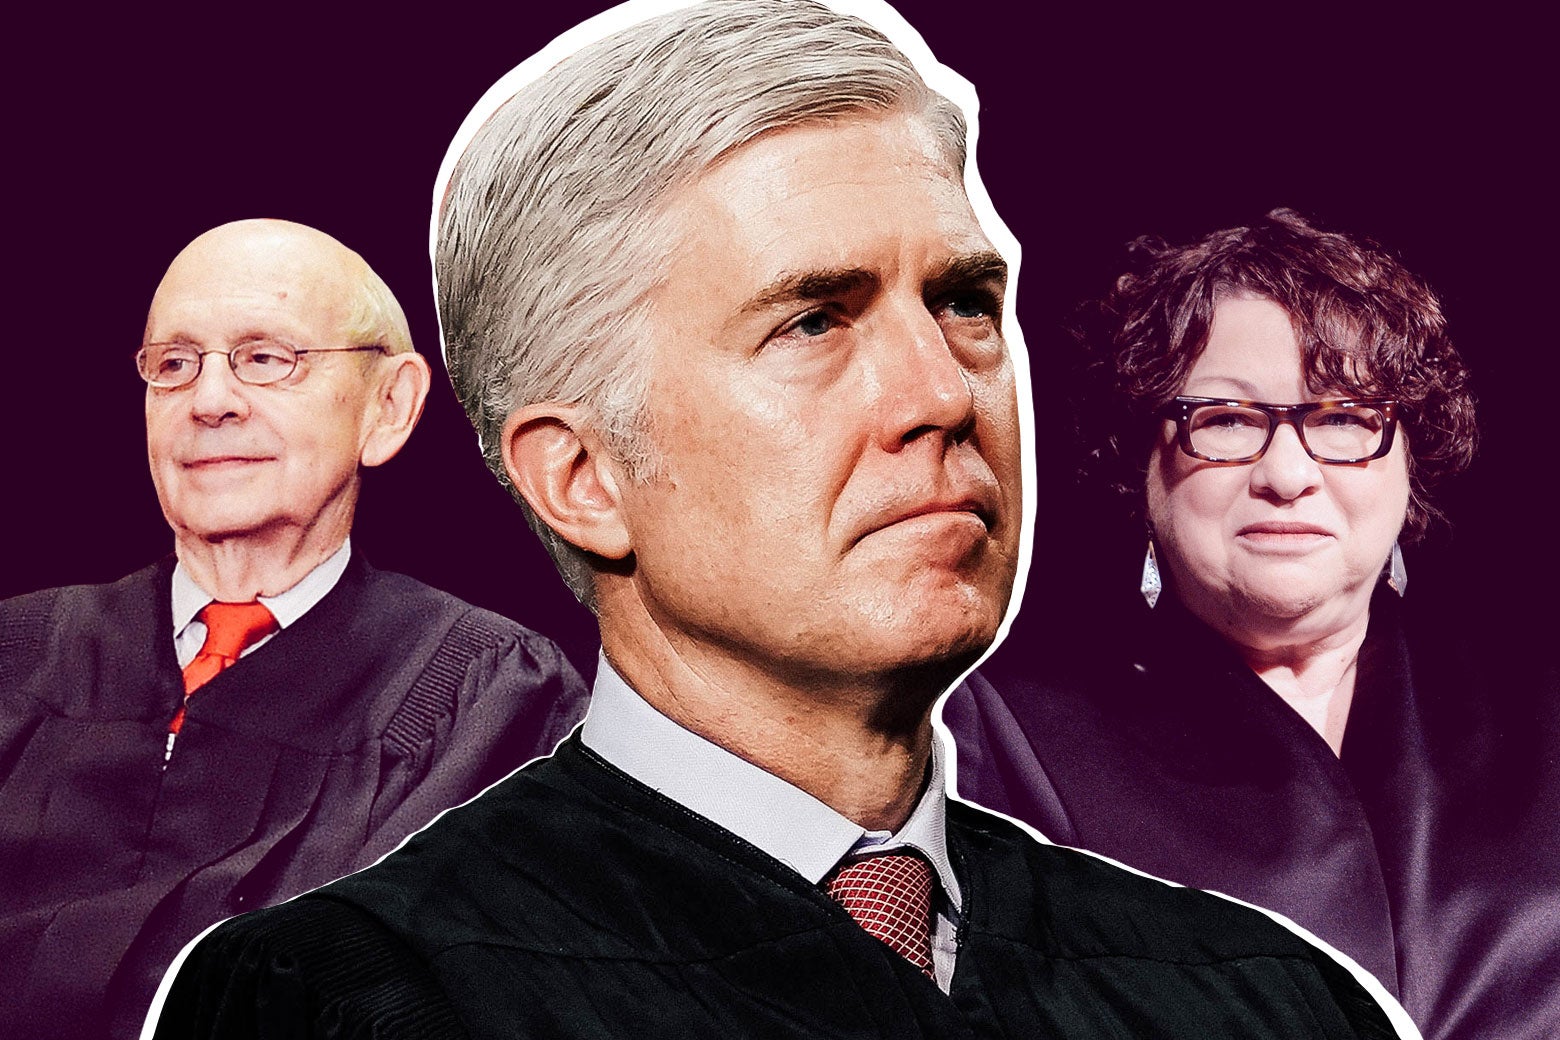 Justices Stephen Breyer, Neil Gorsuch, and Sonia Sotomayor.